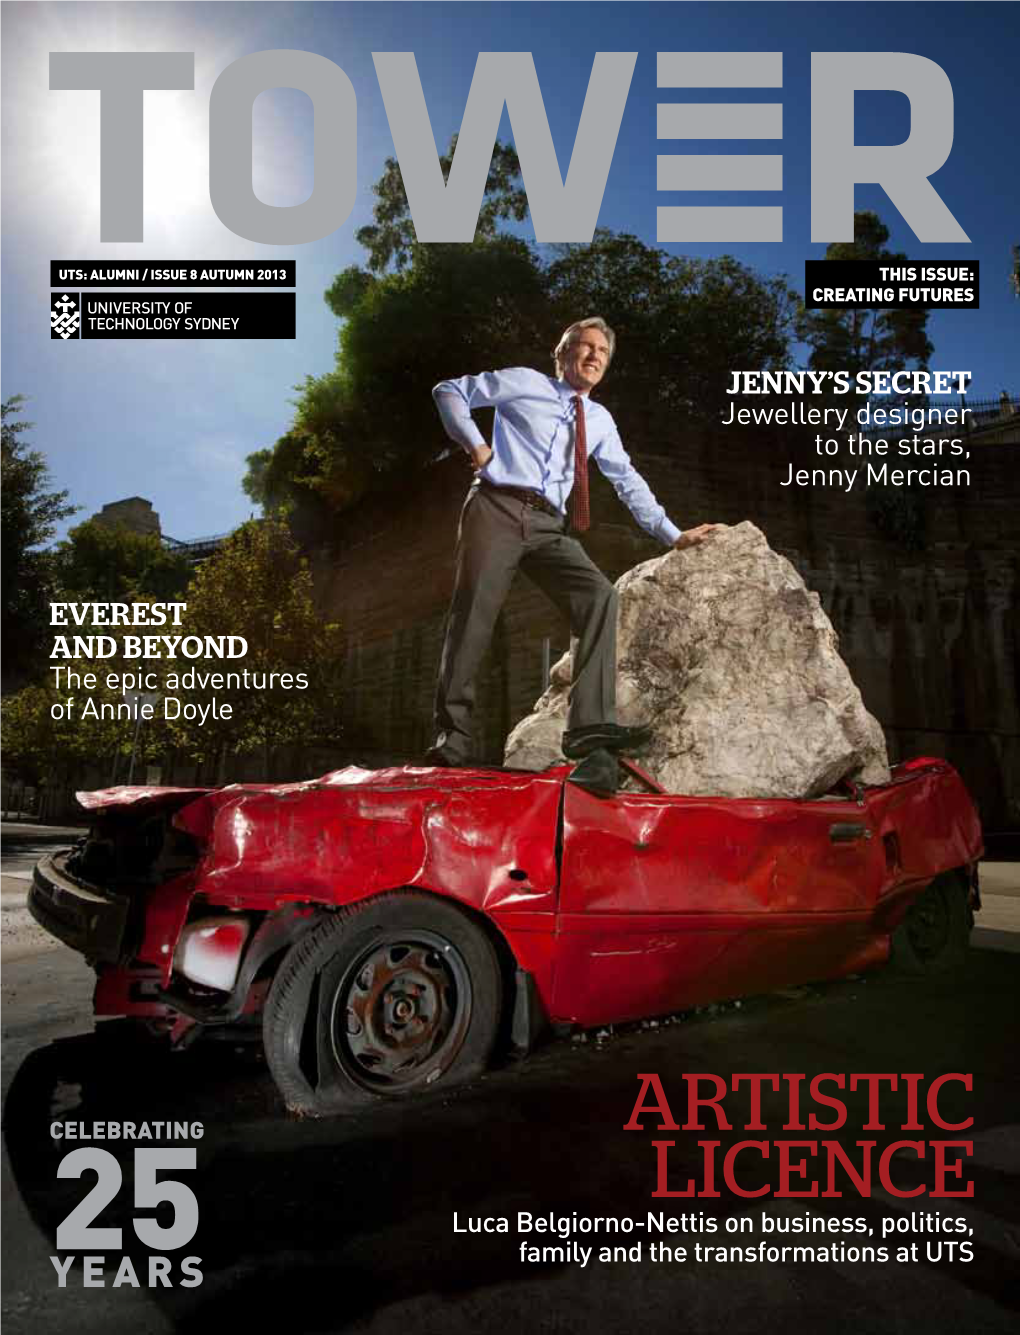 Tower Issue08 Autumn2013.Pdf